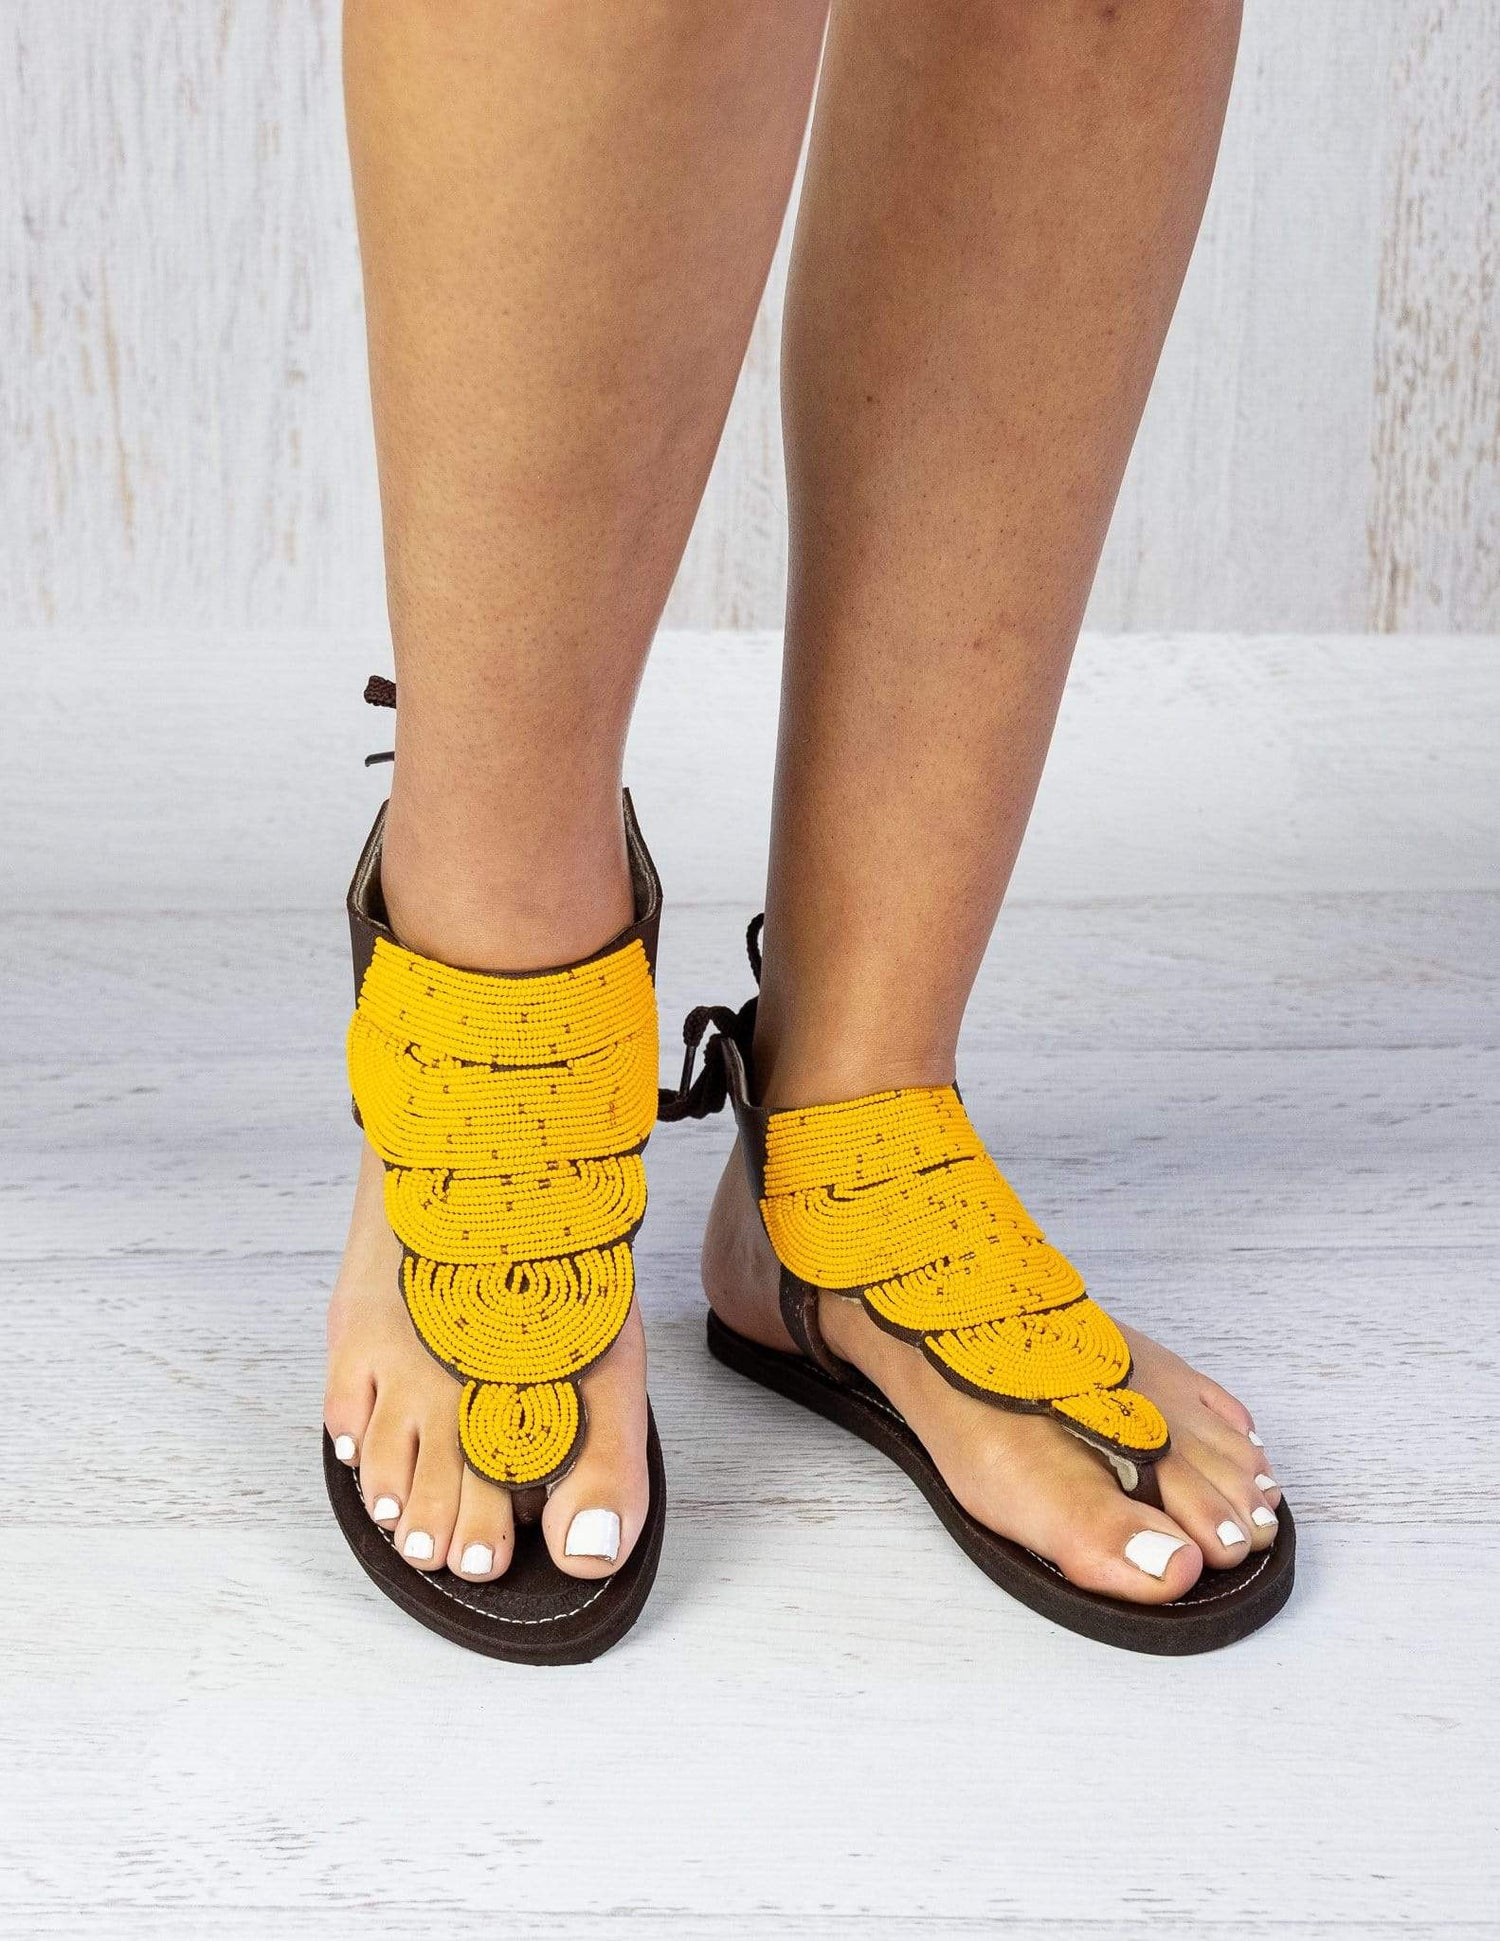 Afrix Style Shoes 38 (size 7) Yellow Summer Sandals